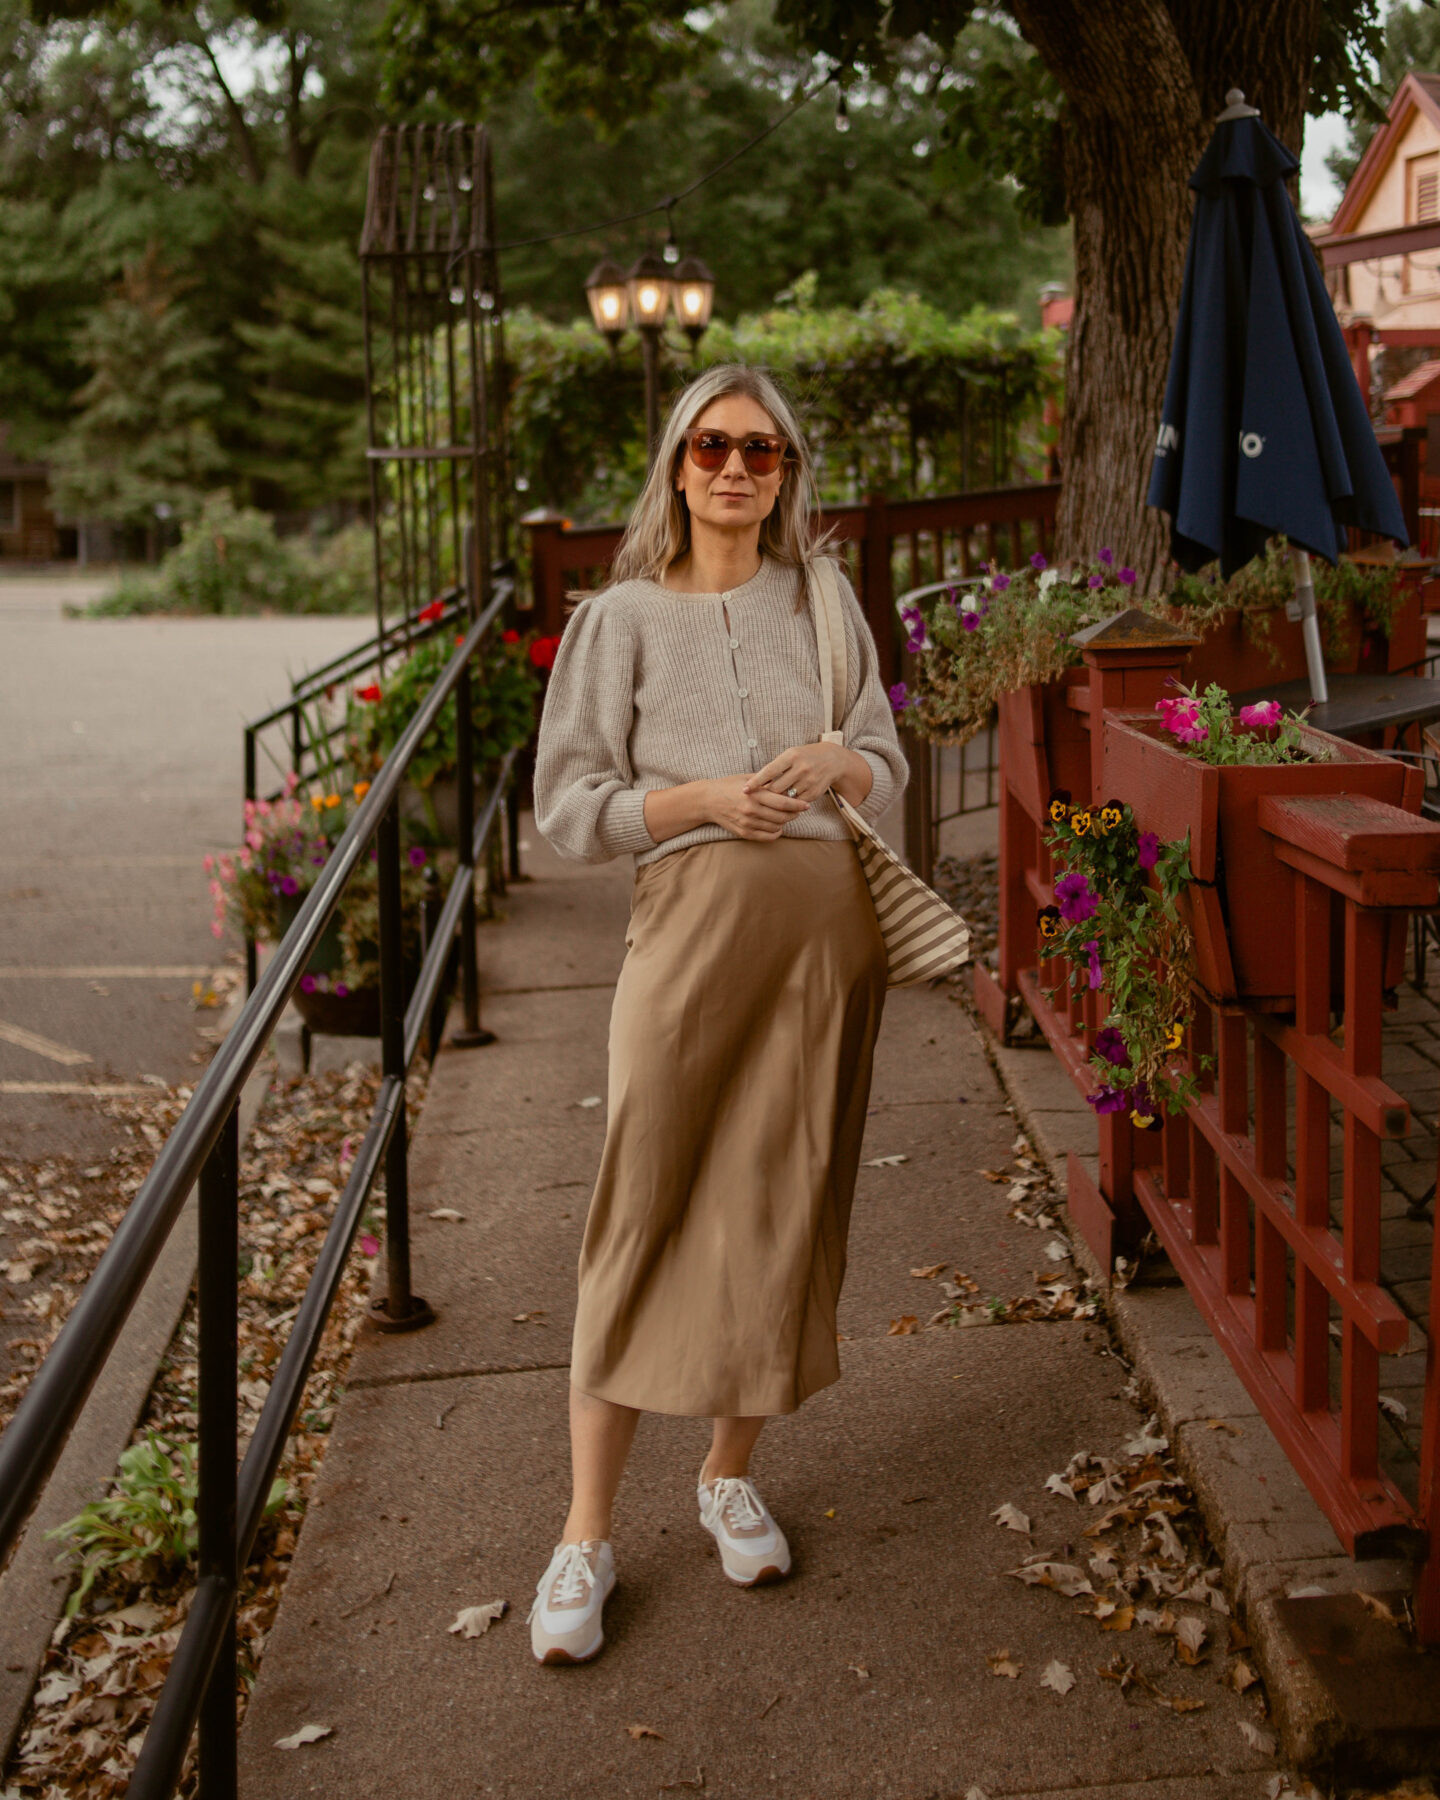 Karin Emily wears a comfy and chic fall outfit: a puff sleeve cardigan with a camel colored slip skirt and a pair of tennis shoes